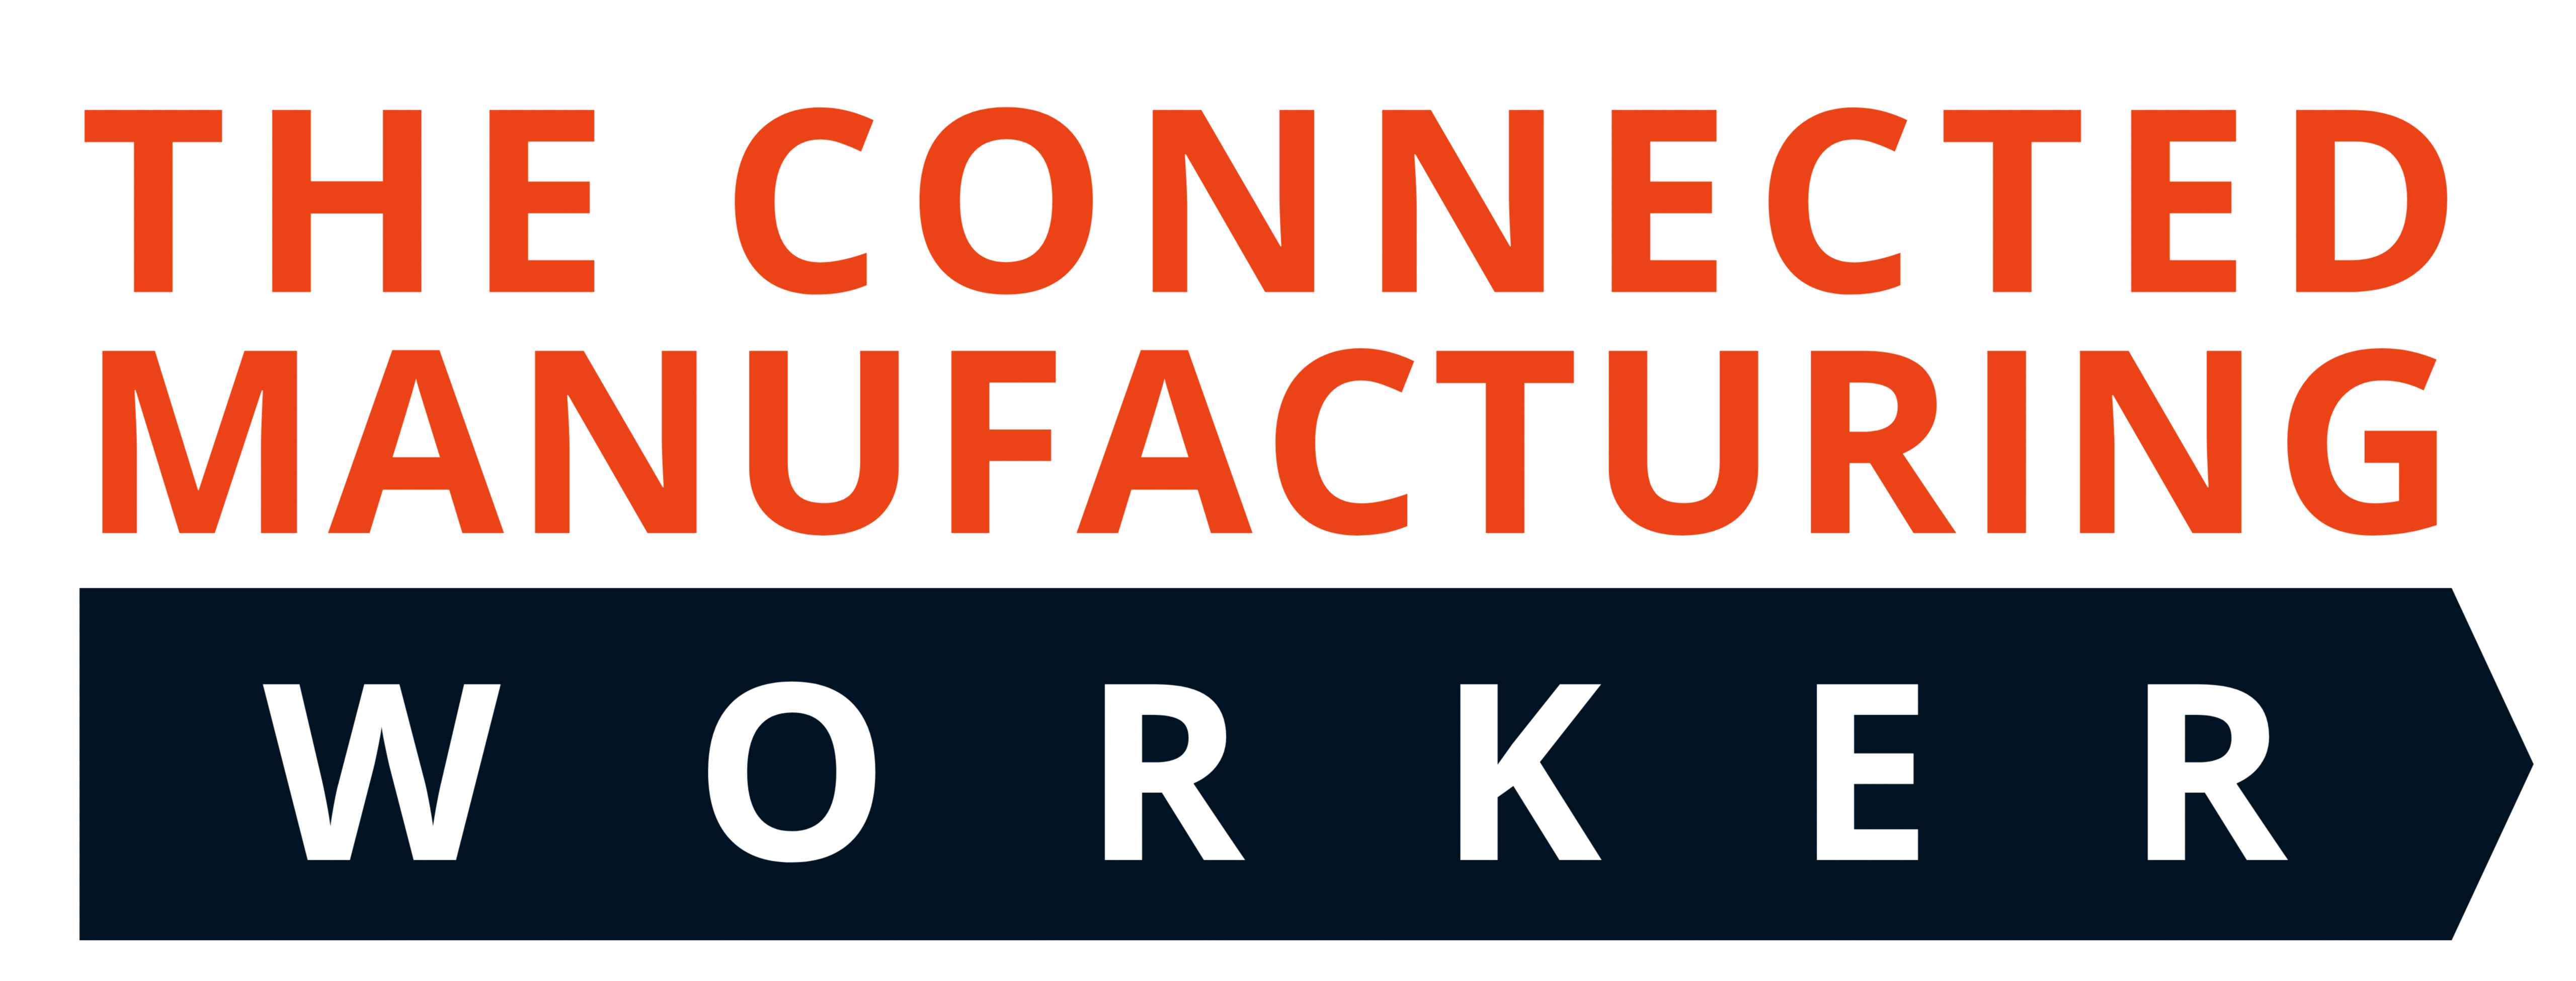 The Connected Manufacturing Worker Logo